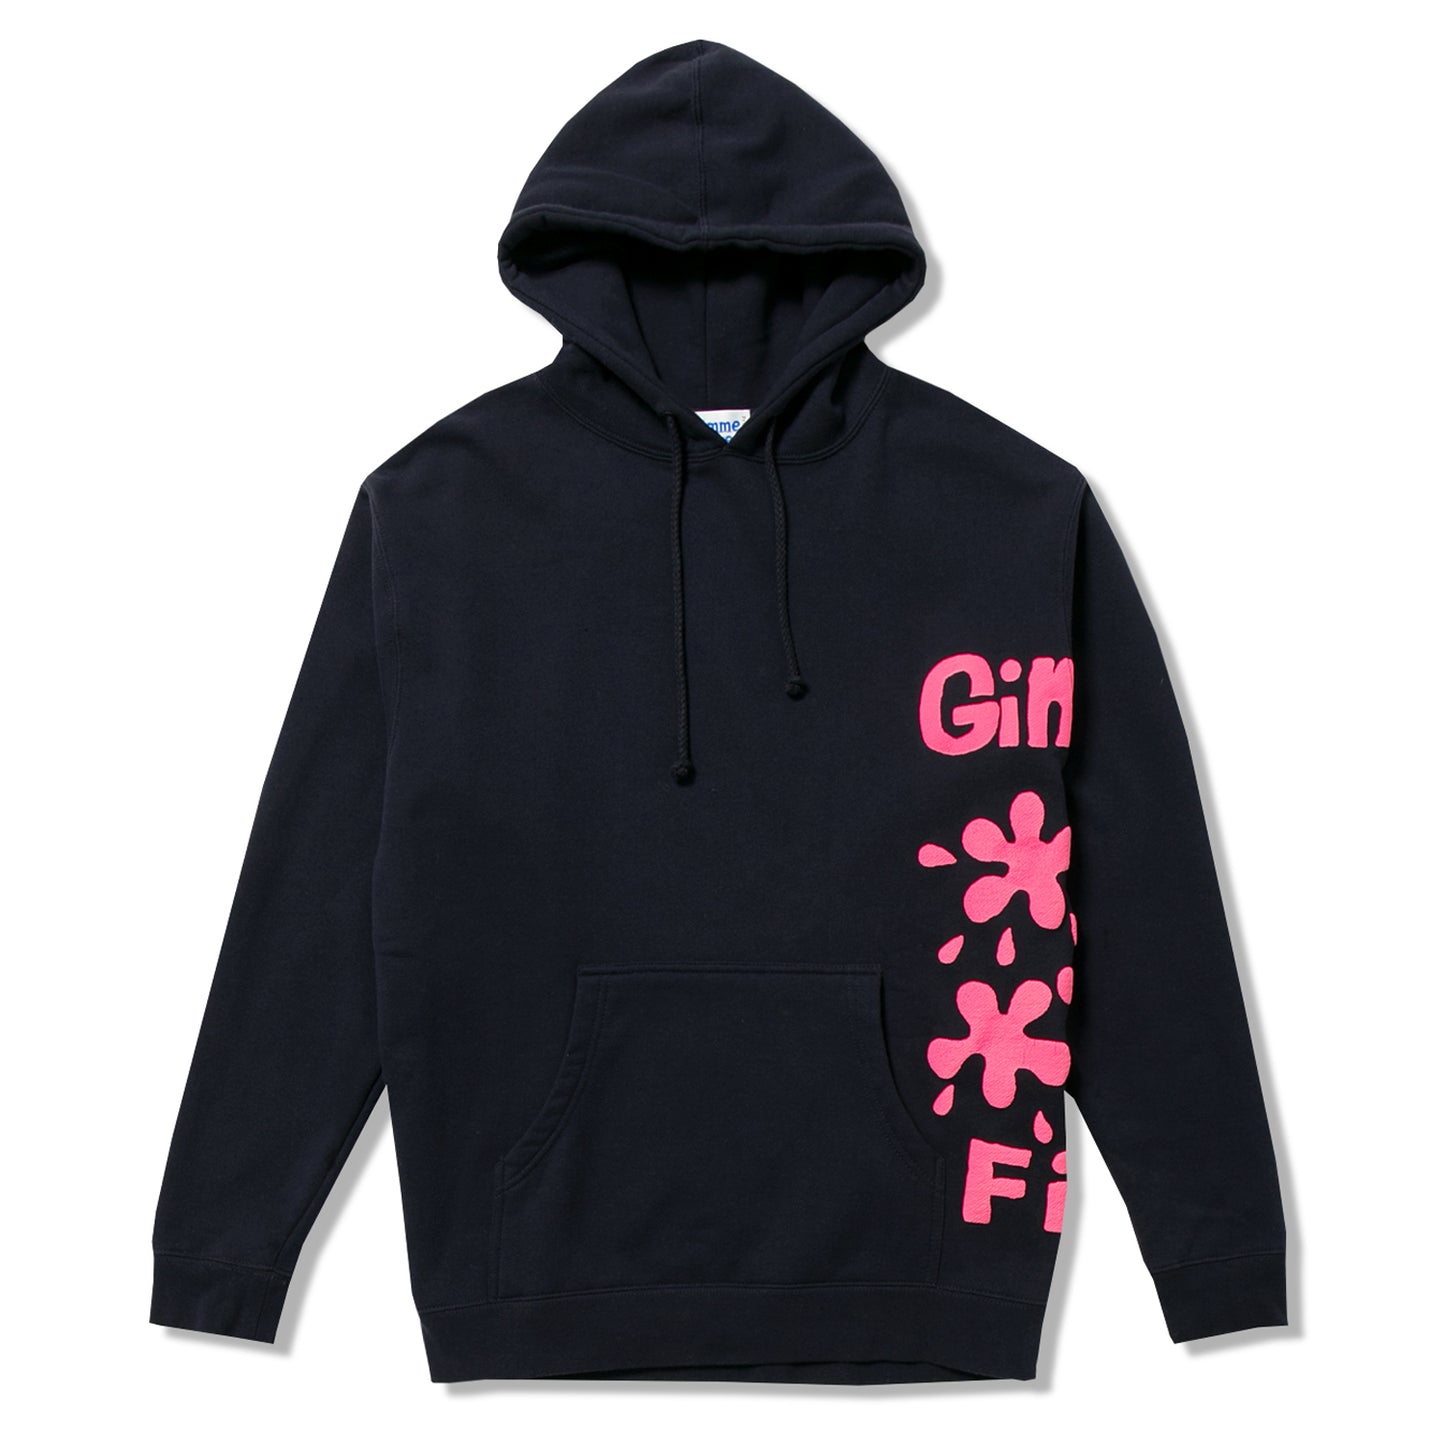 Gimme Five x Tim Comix Stains Hoodie